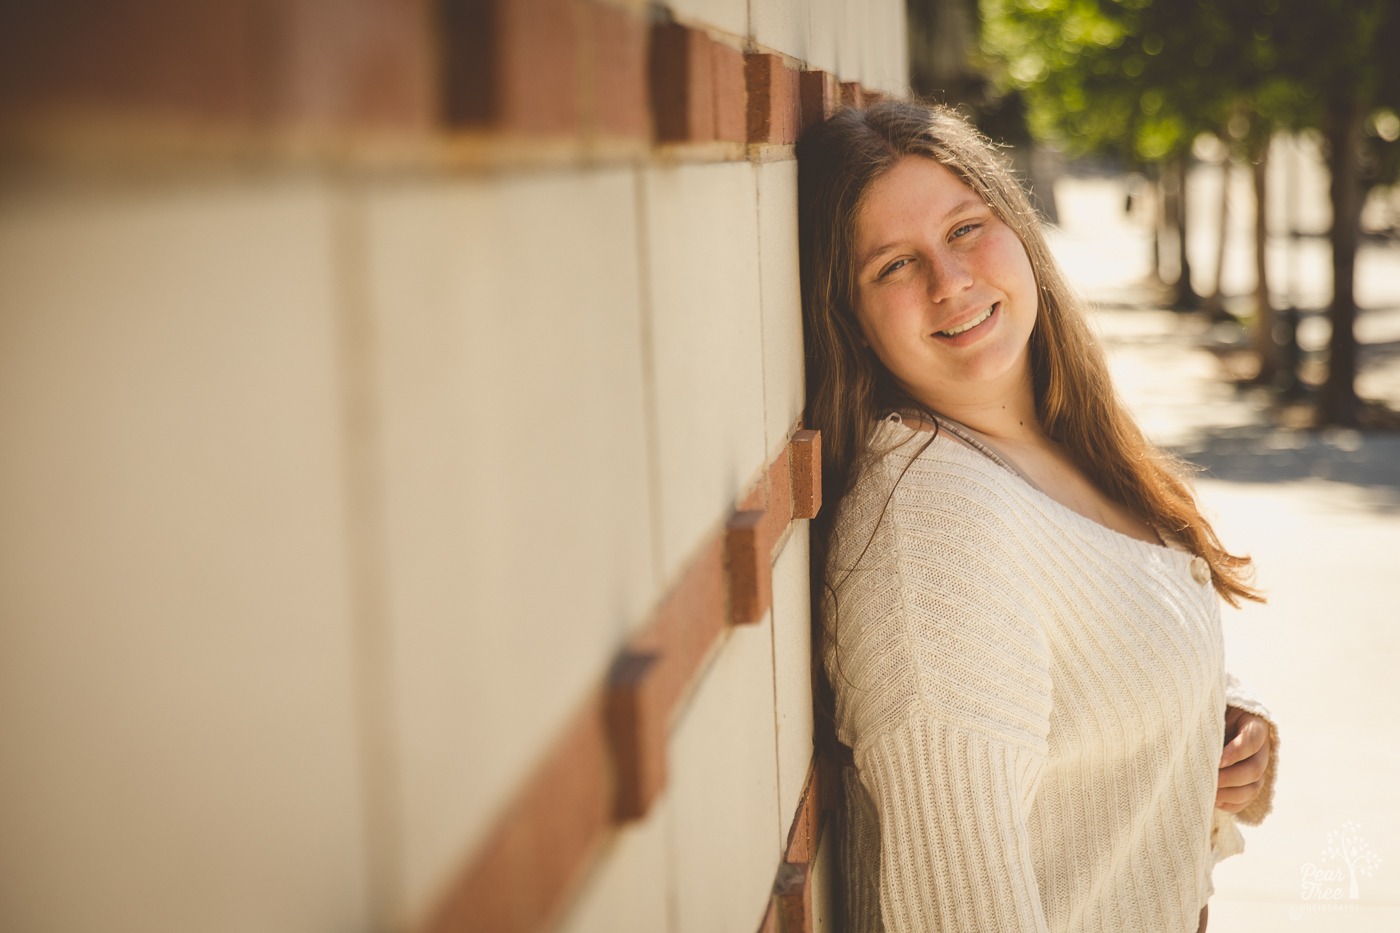 High school senior girl leaning against a cement wall and wearing a cream sweater